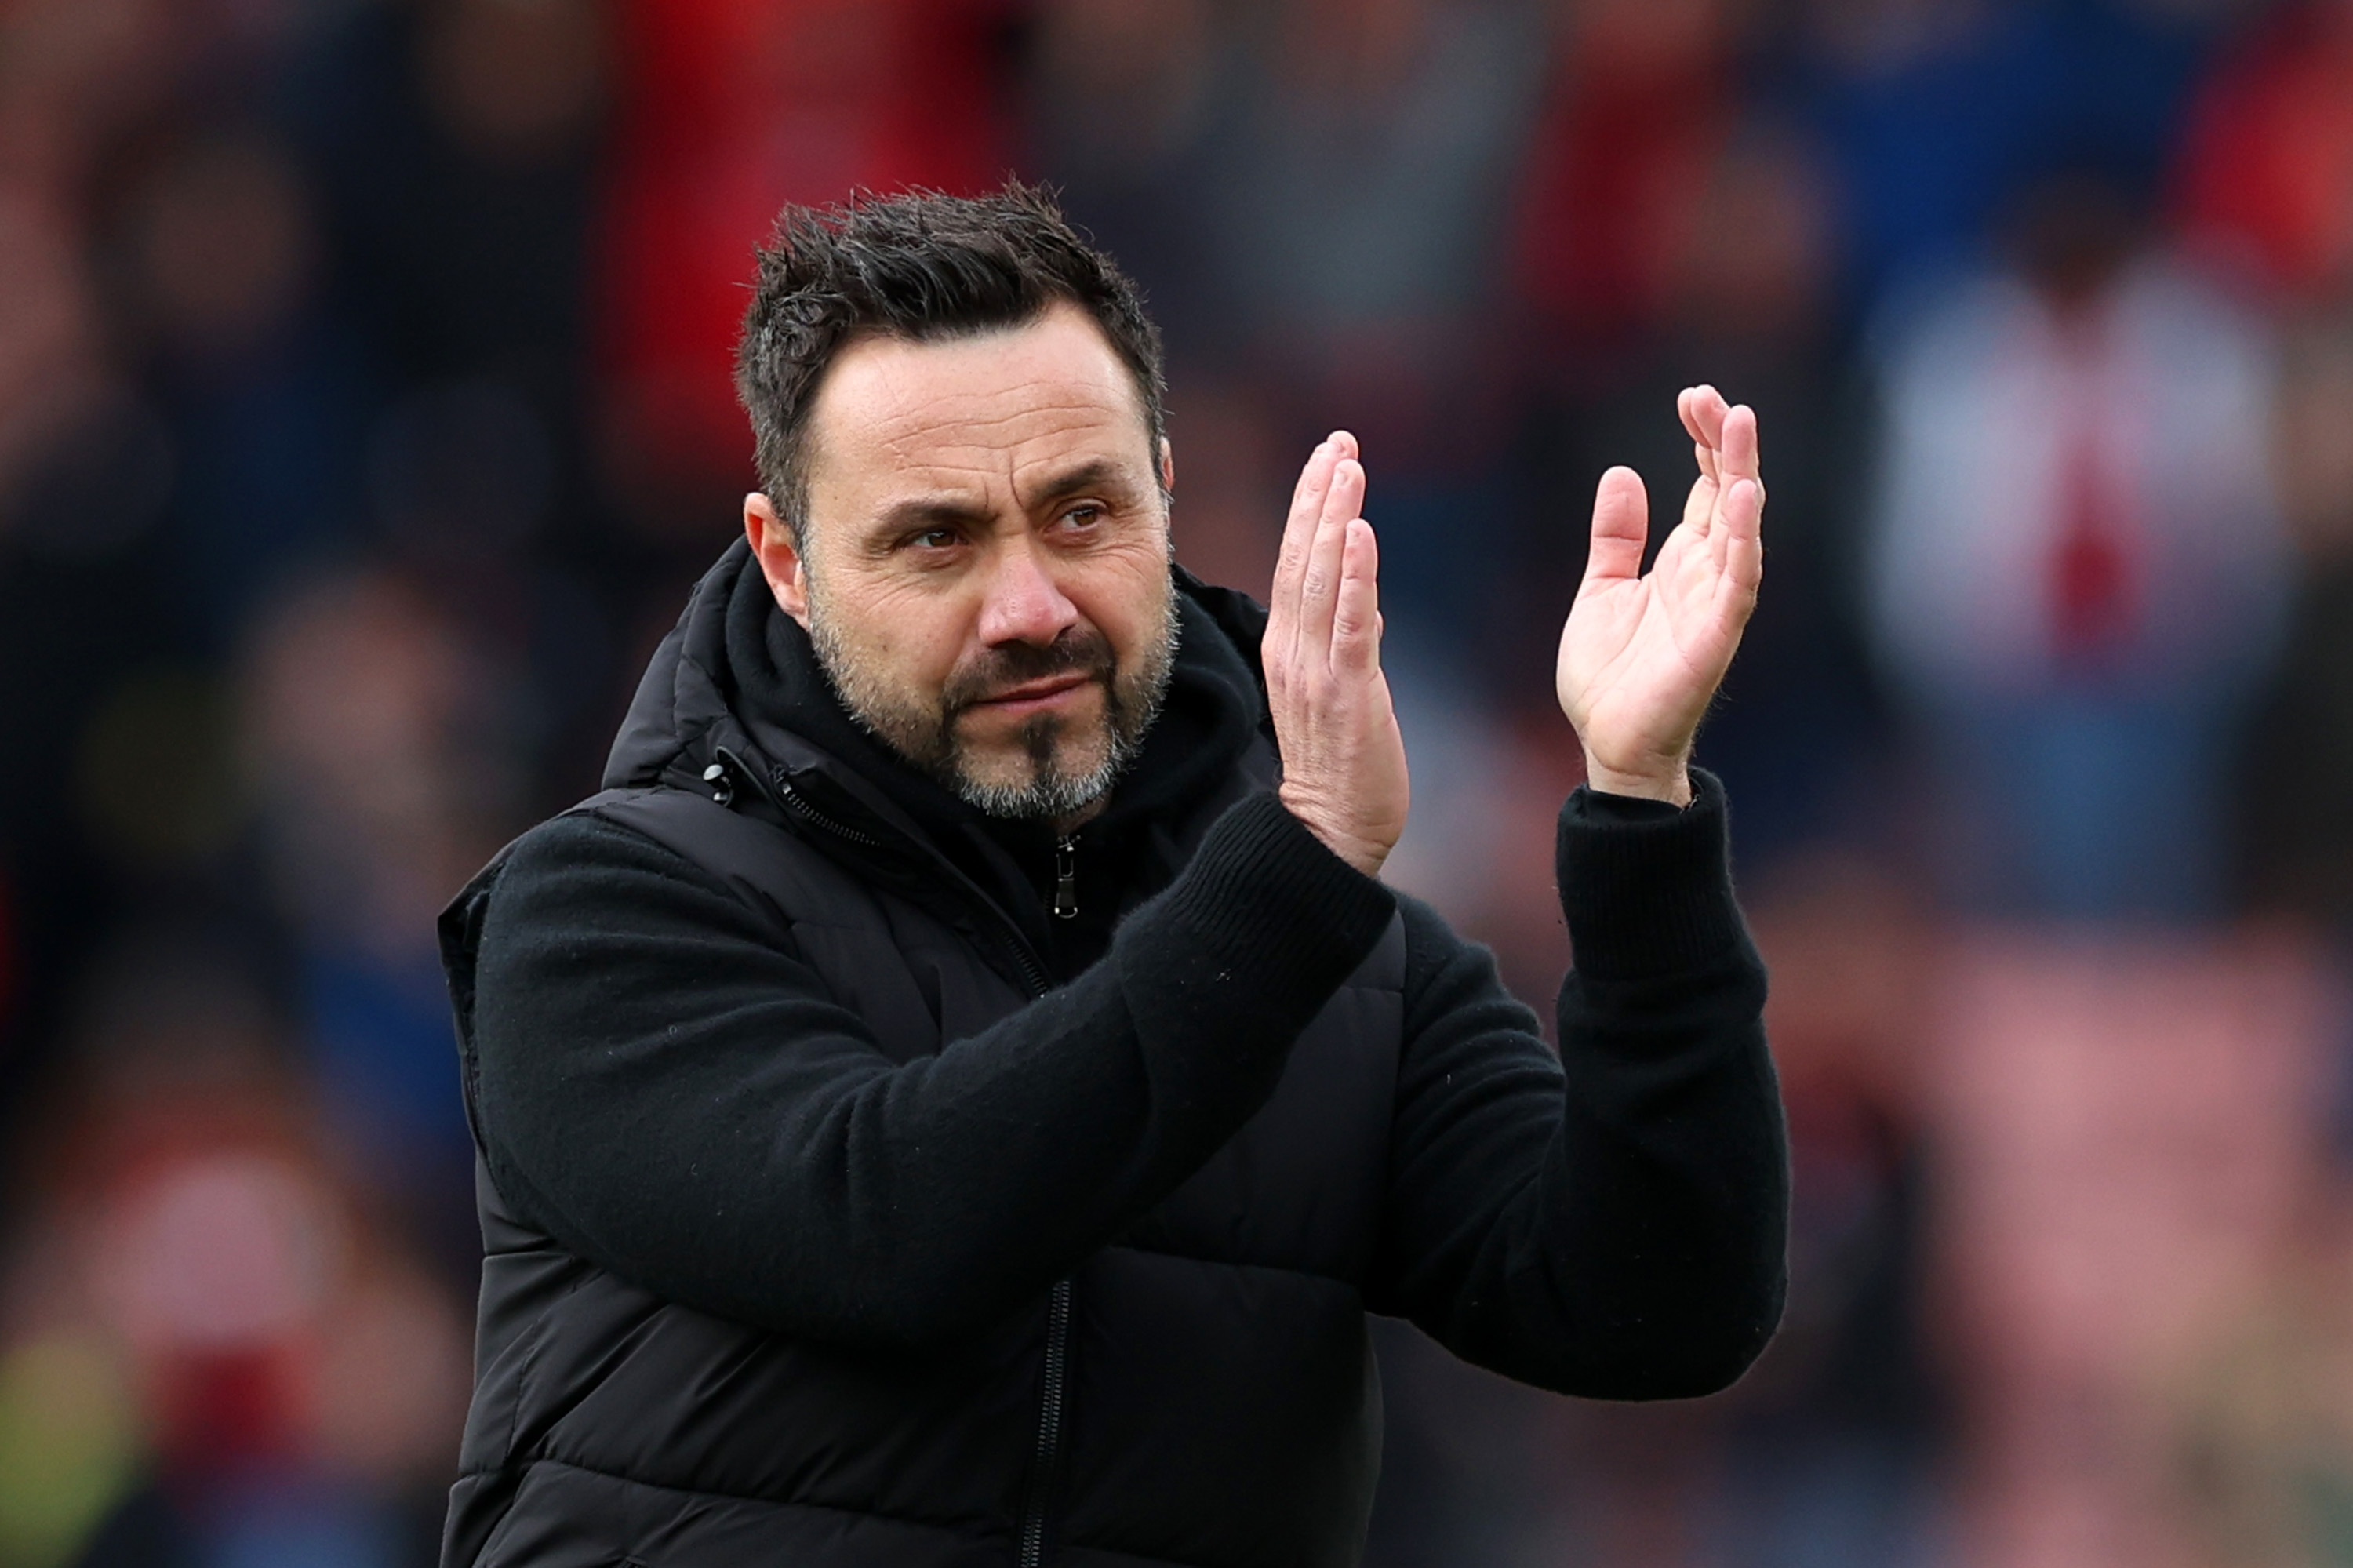 Roberto De Zerbi “very sad” after Brighton confirm he will leave job this summer amid links to Man United and Bayern Munich